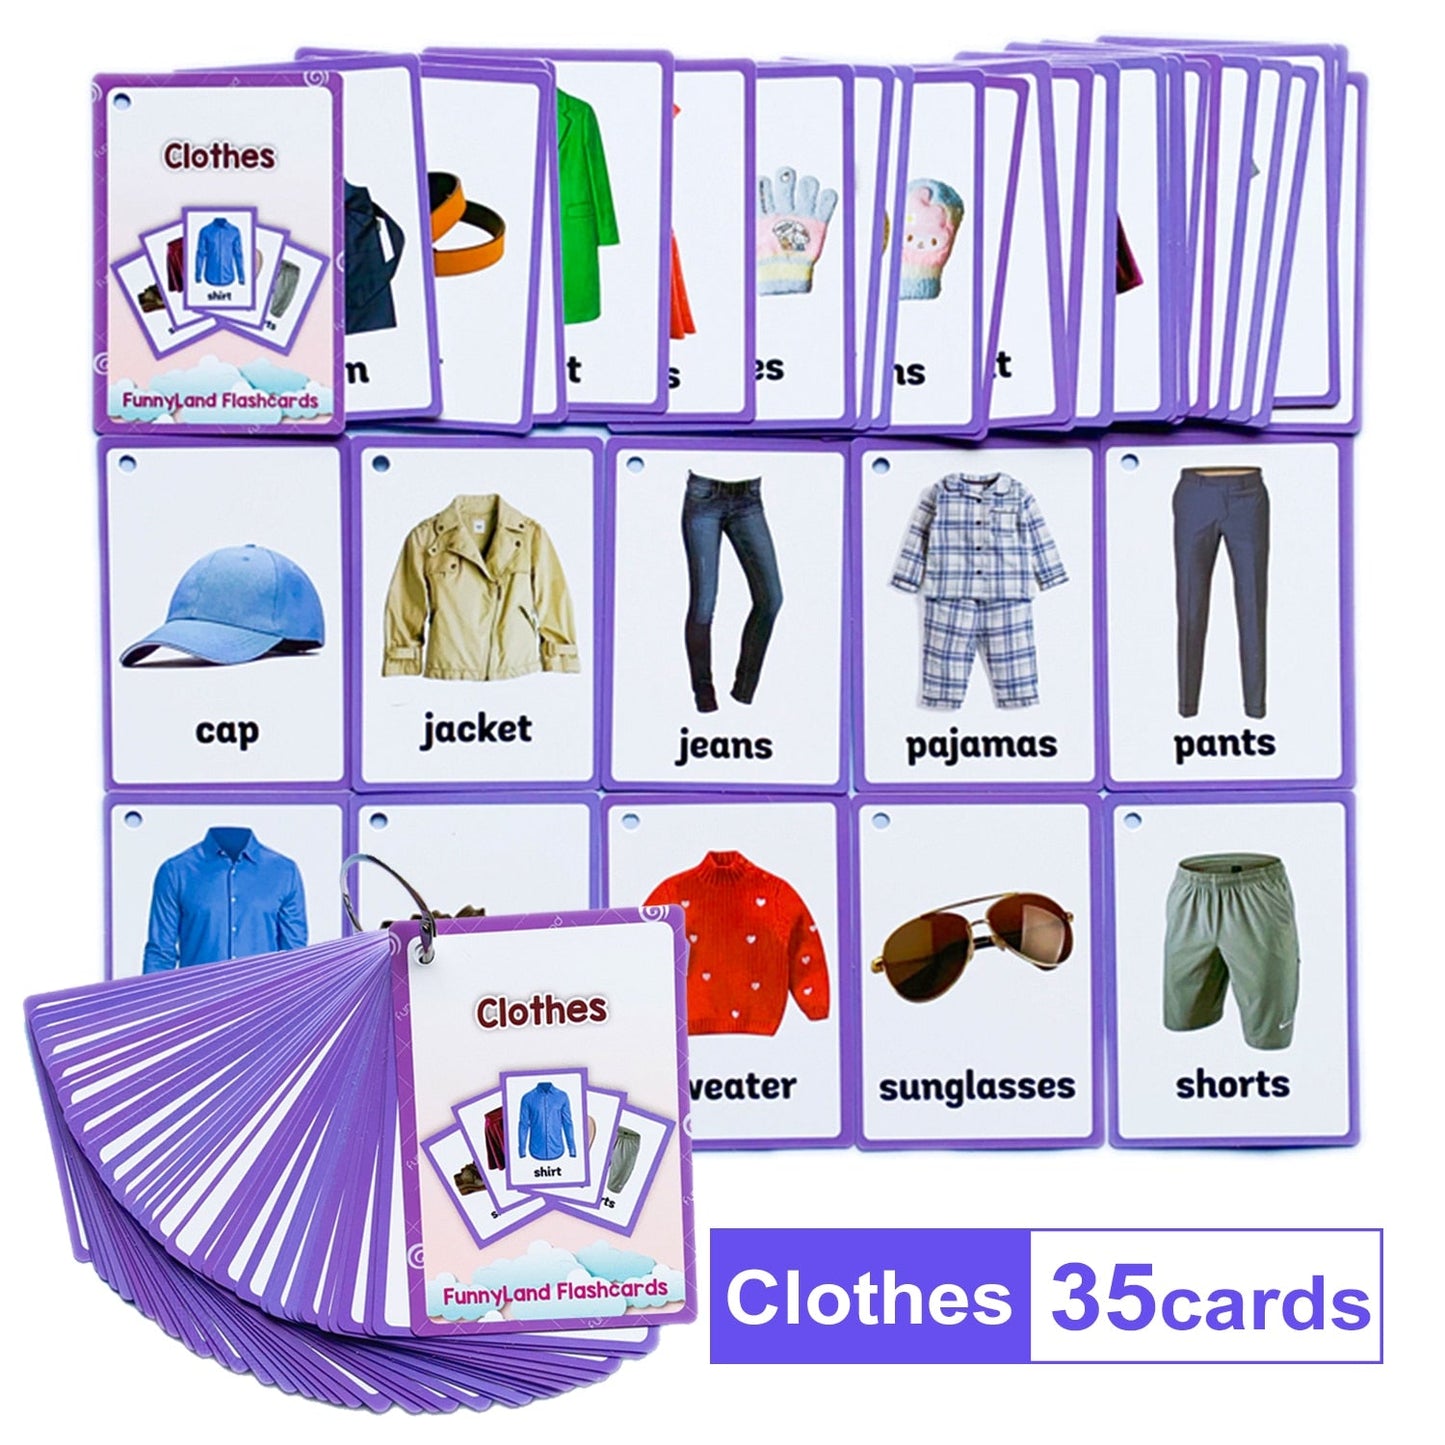 Kinder Baby English Learning Word Pocket Card Flashcard Montessori Learning Game Tool Words Table Game Gift for Kids Teach Toyland EU Toyland EU